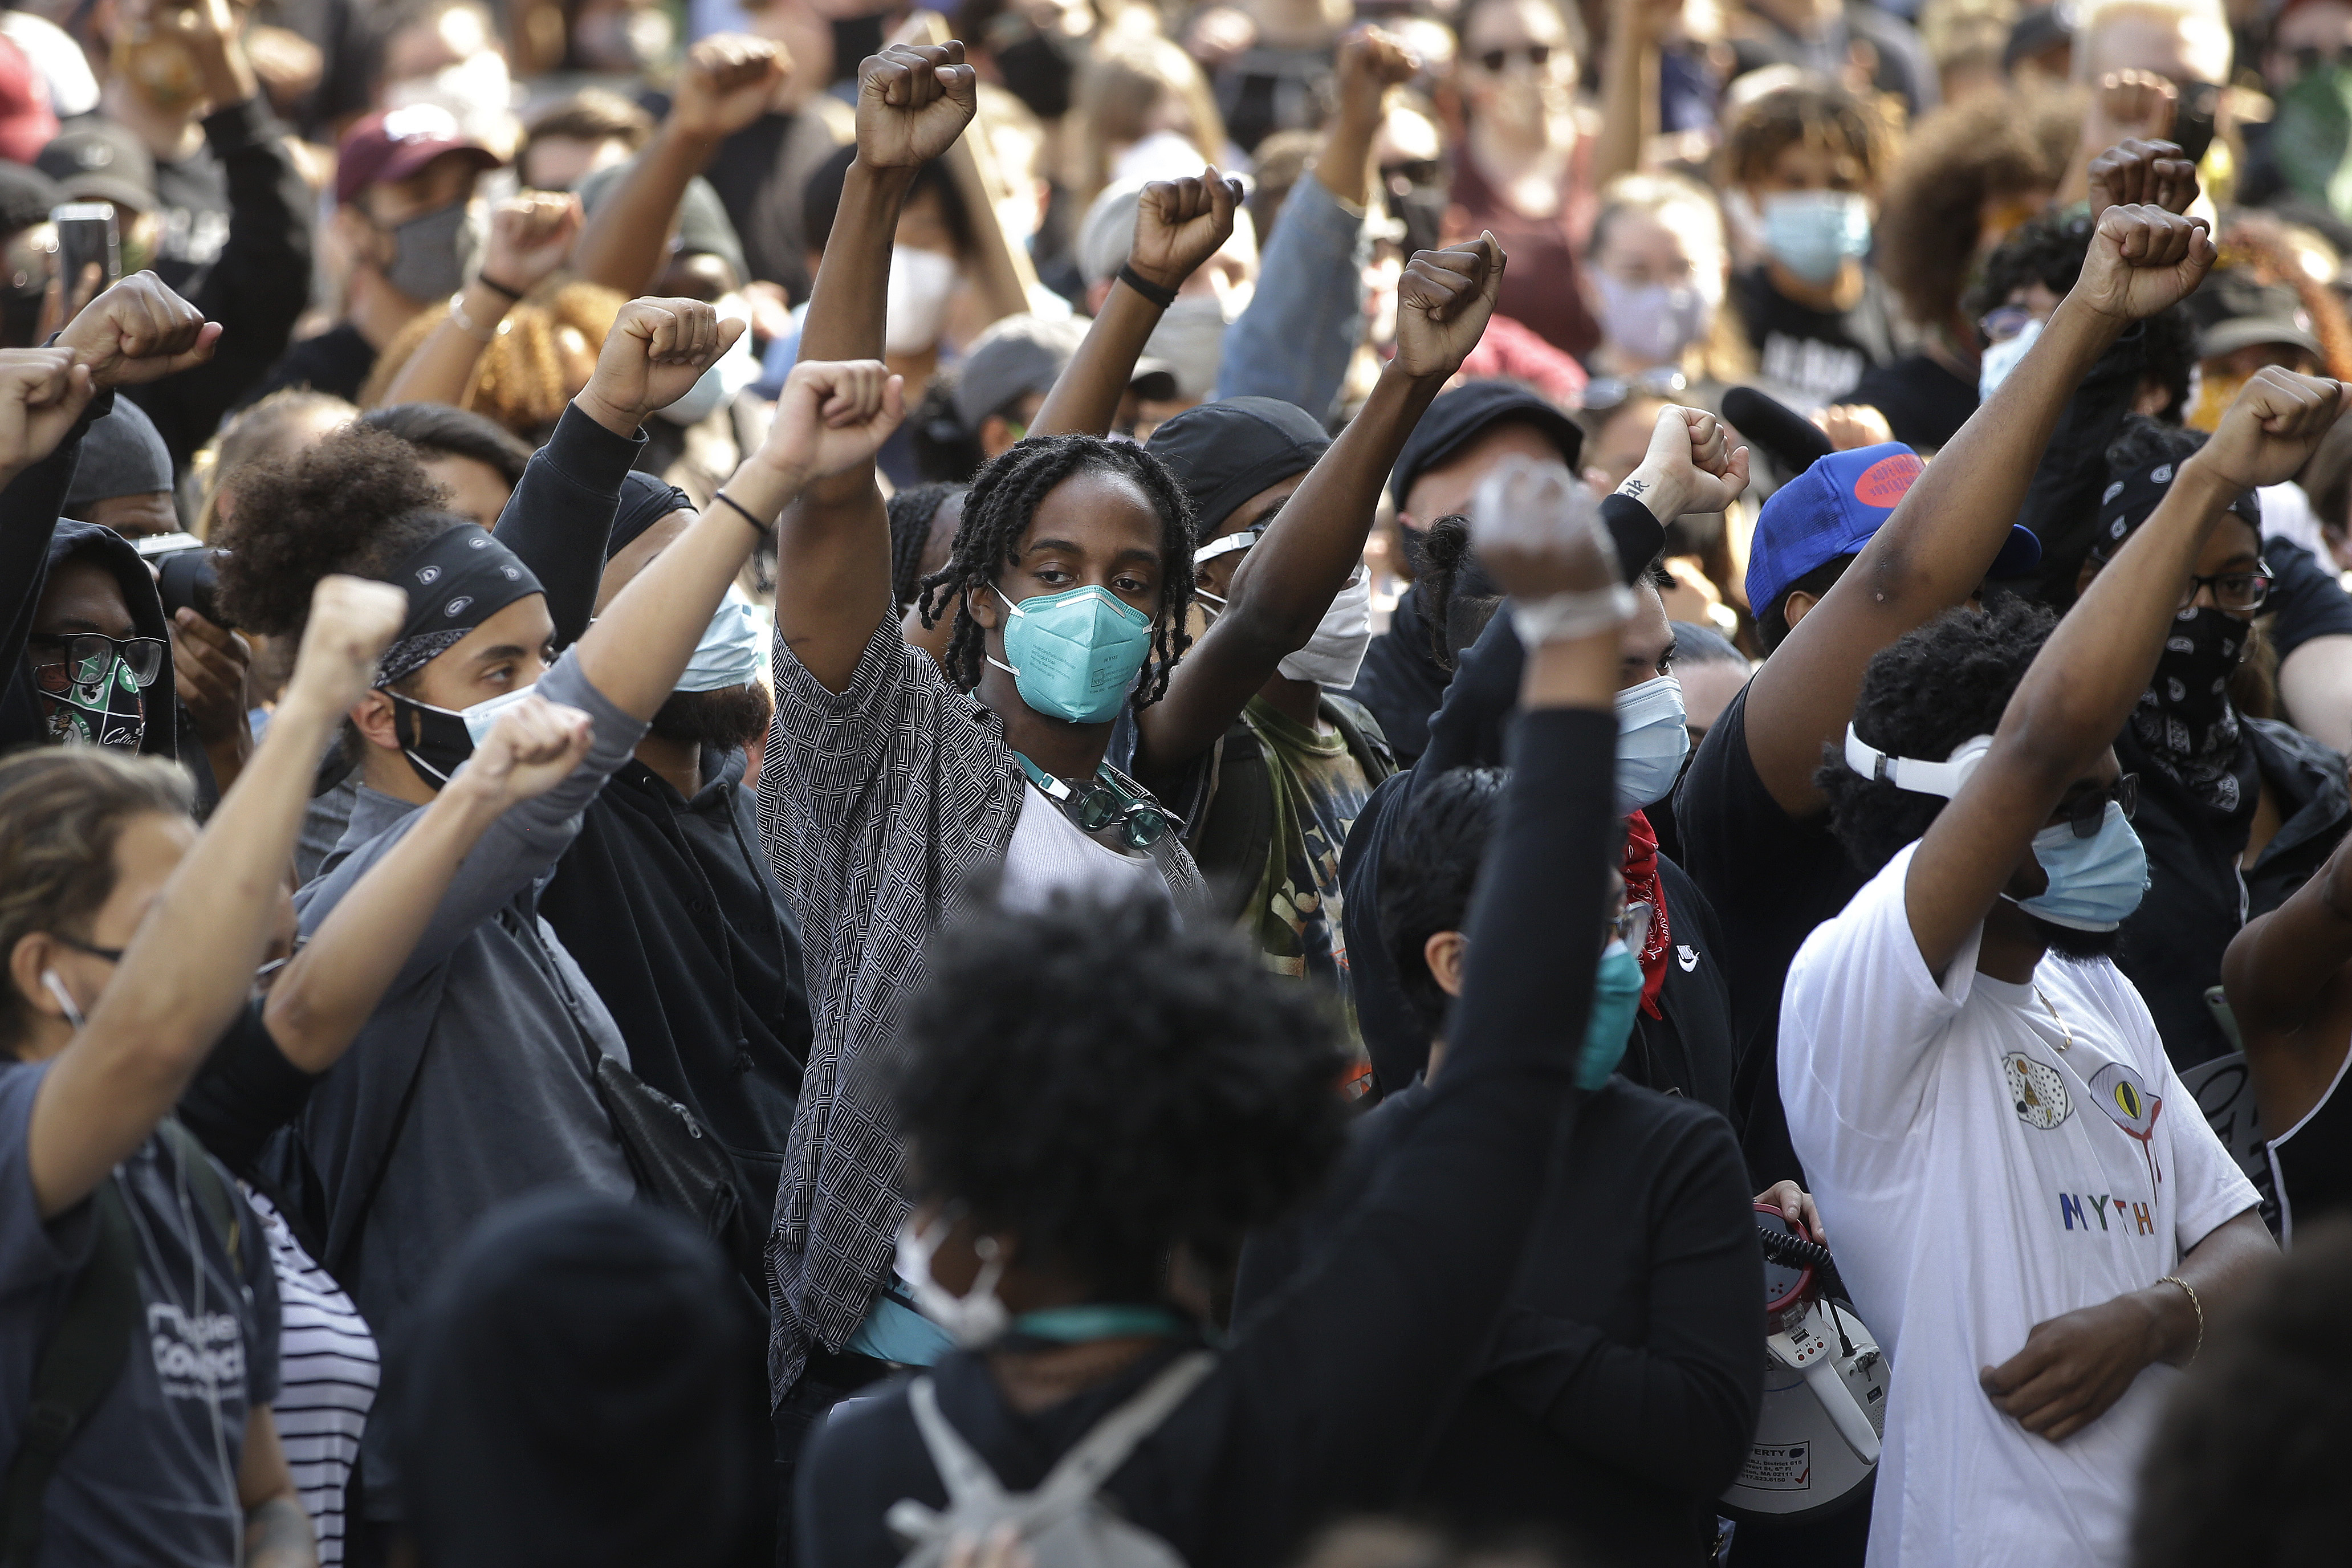 Demonstrators raise their arms during a protest against police brutality on June 10 in Boston.